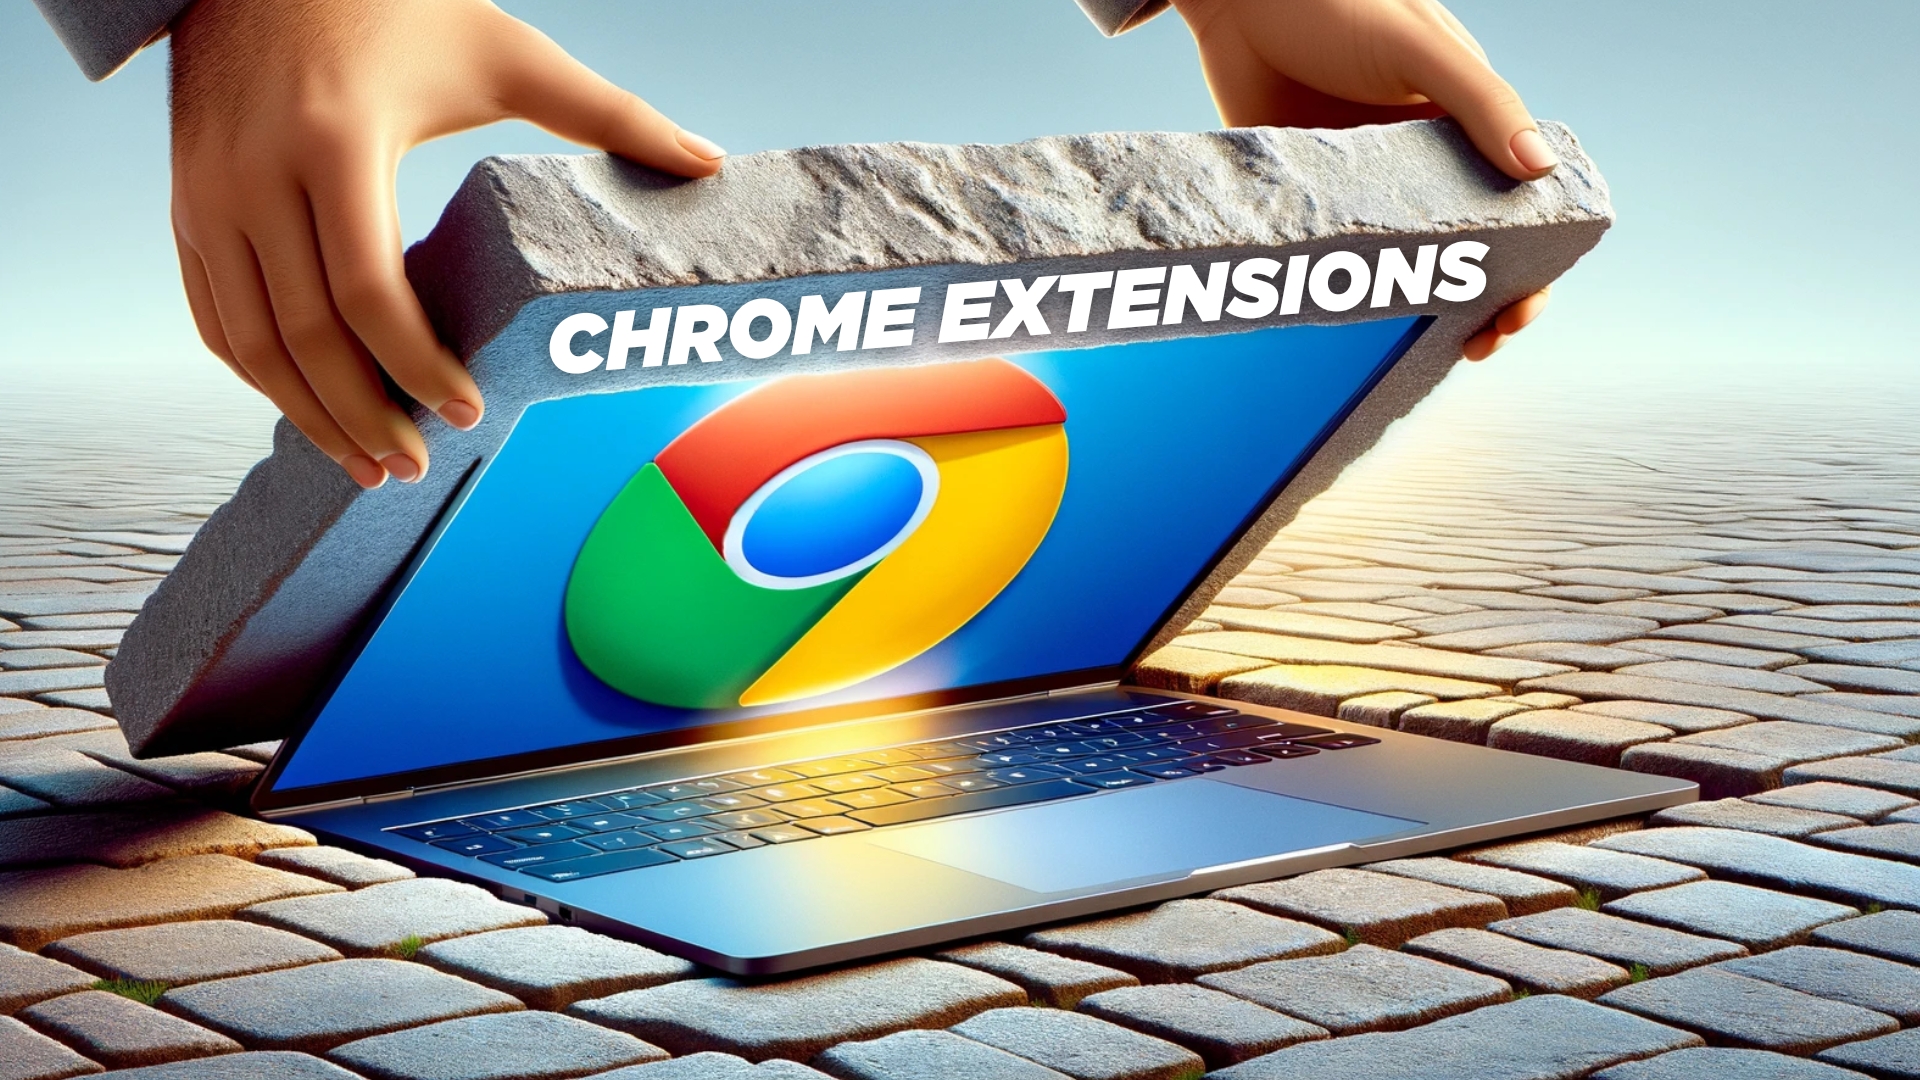 laptop showing chrome symbol saying chrome extensions